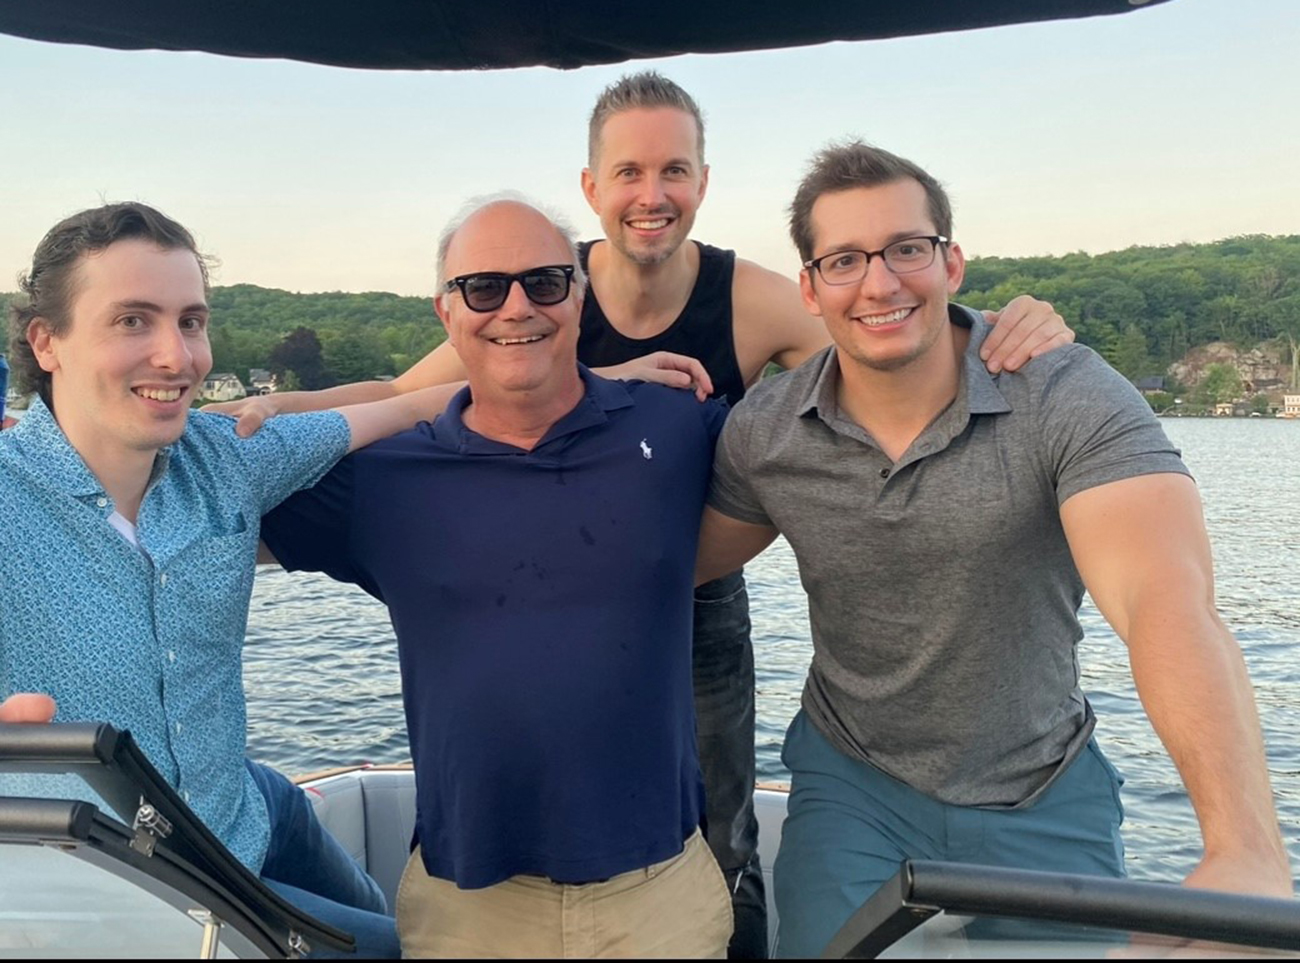 Robert Arciero, MD, with fellows on a boat